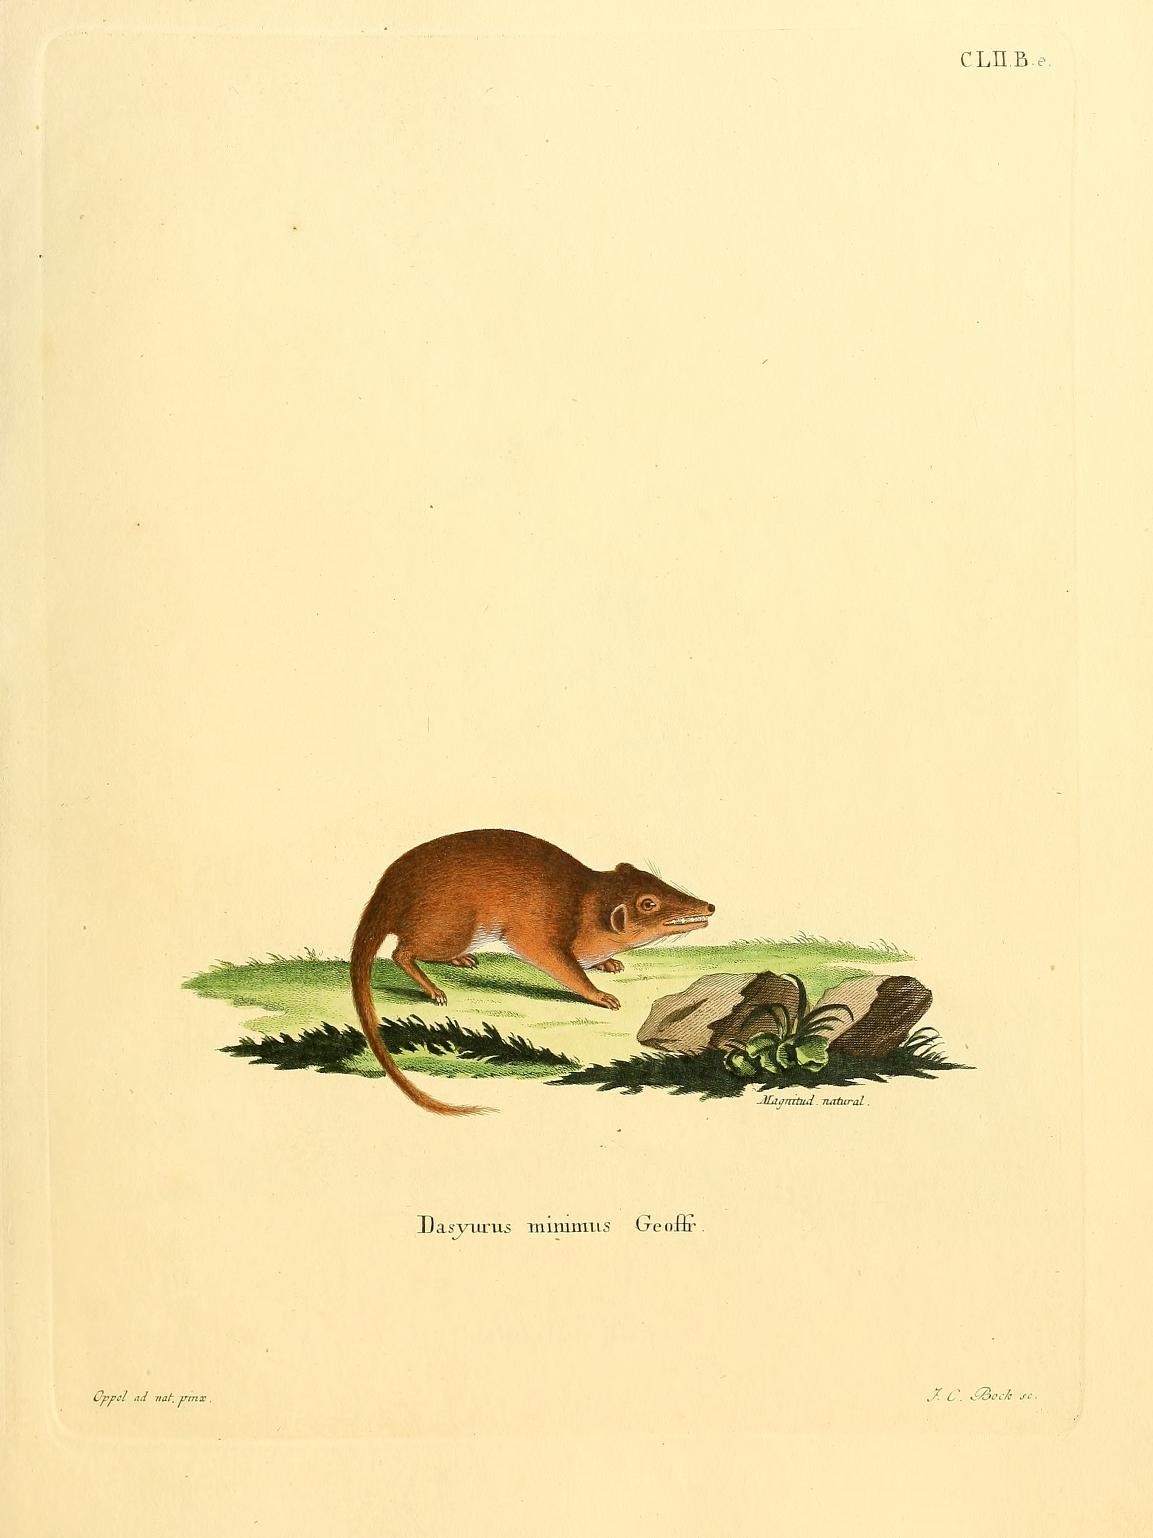 an illustration of an animal on the ground